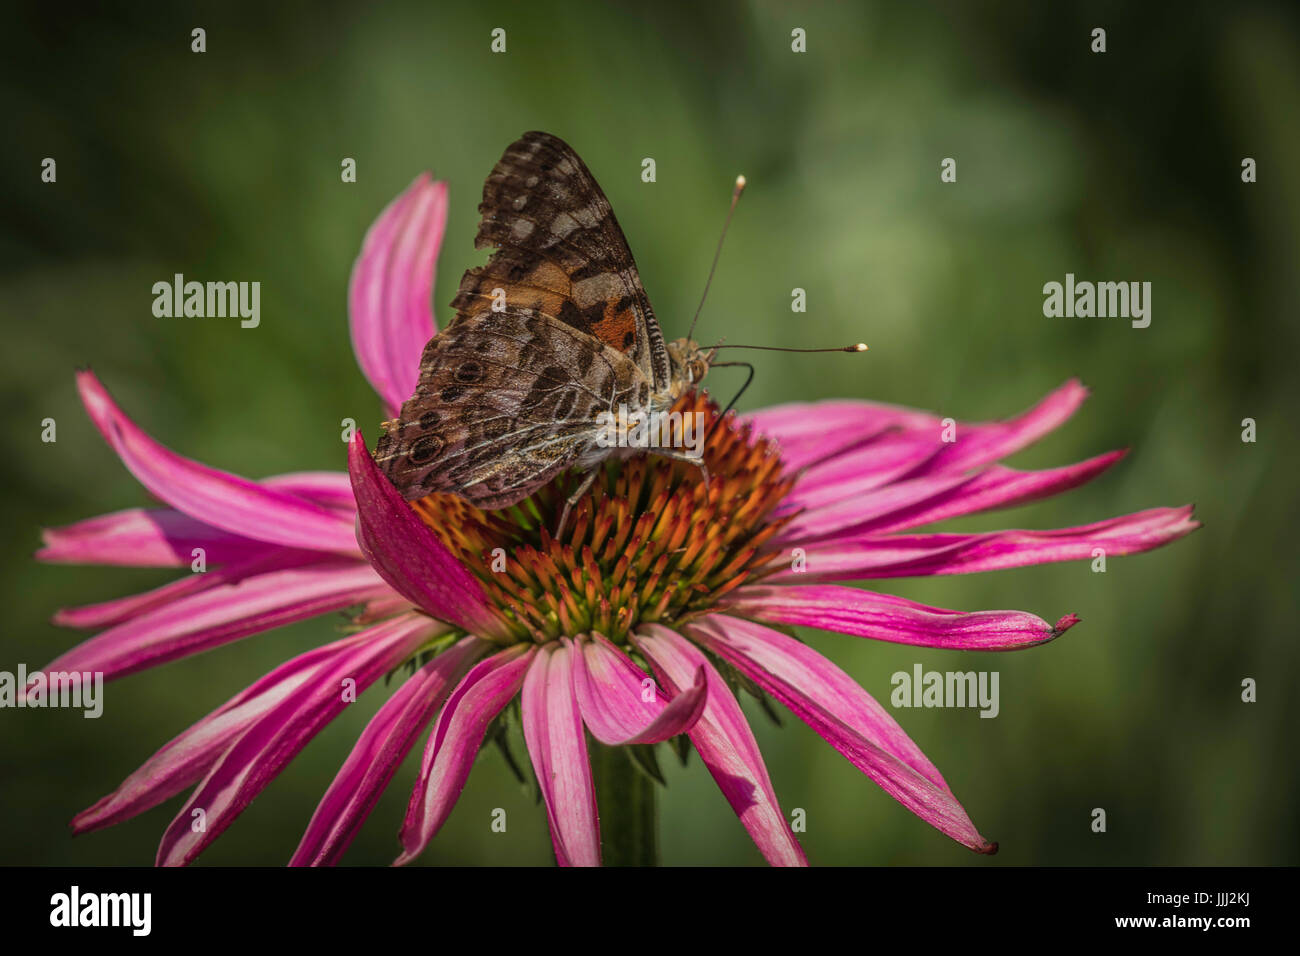 Close up of a butterfly on a flower Stock Photo